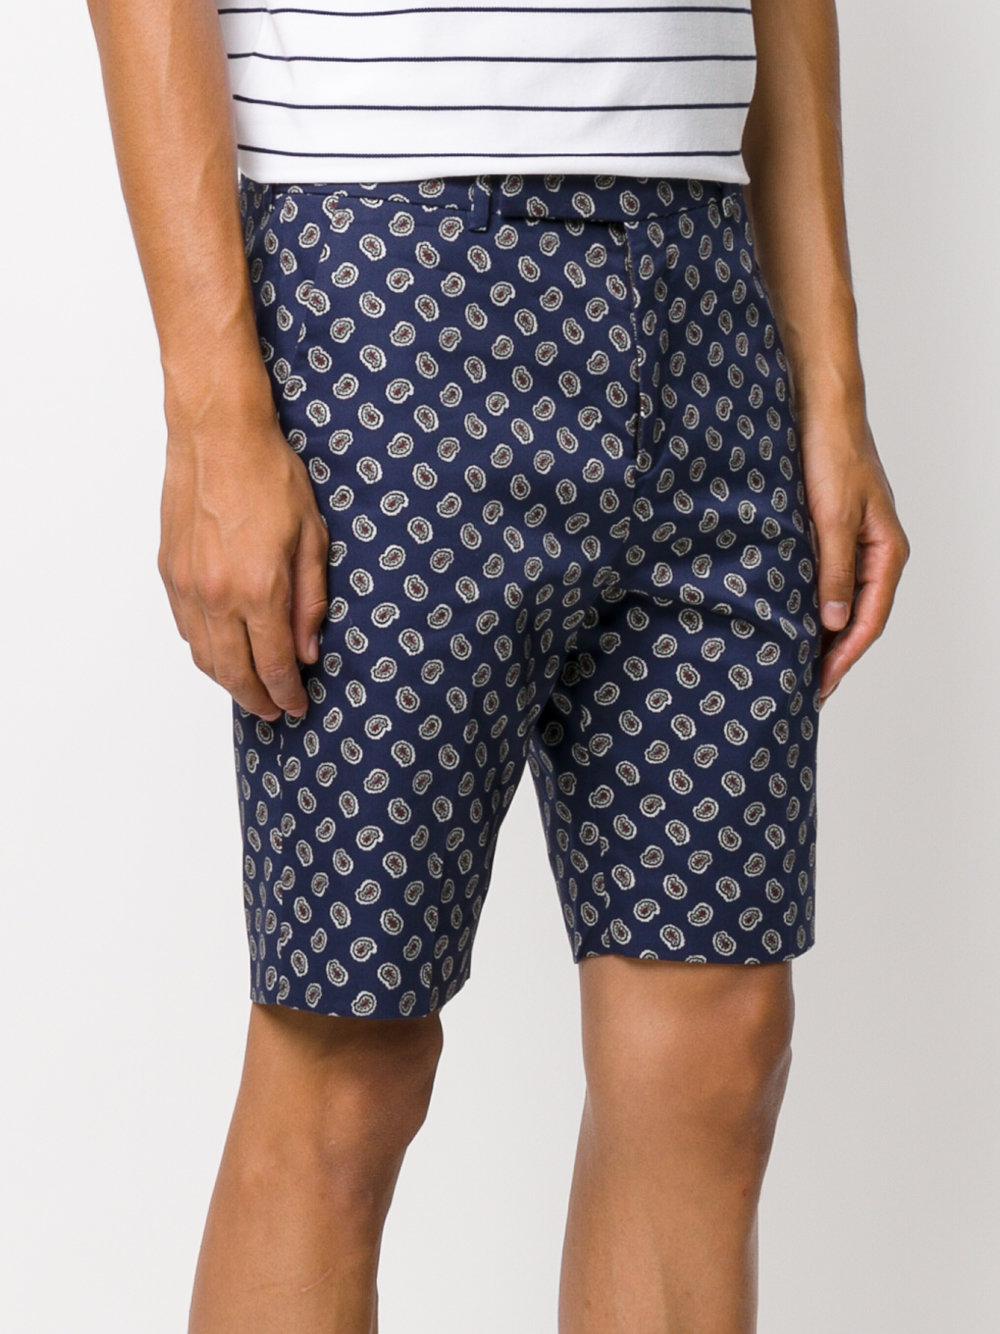 Paul Smith Cotton Paisley-print Shorts in Blue for Men - Lyst